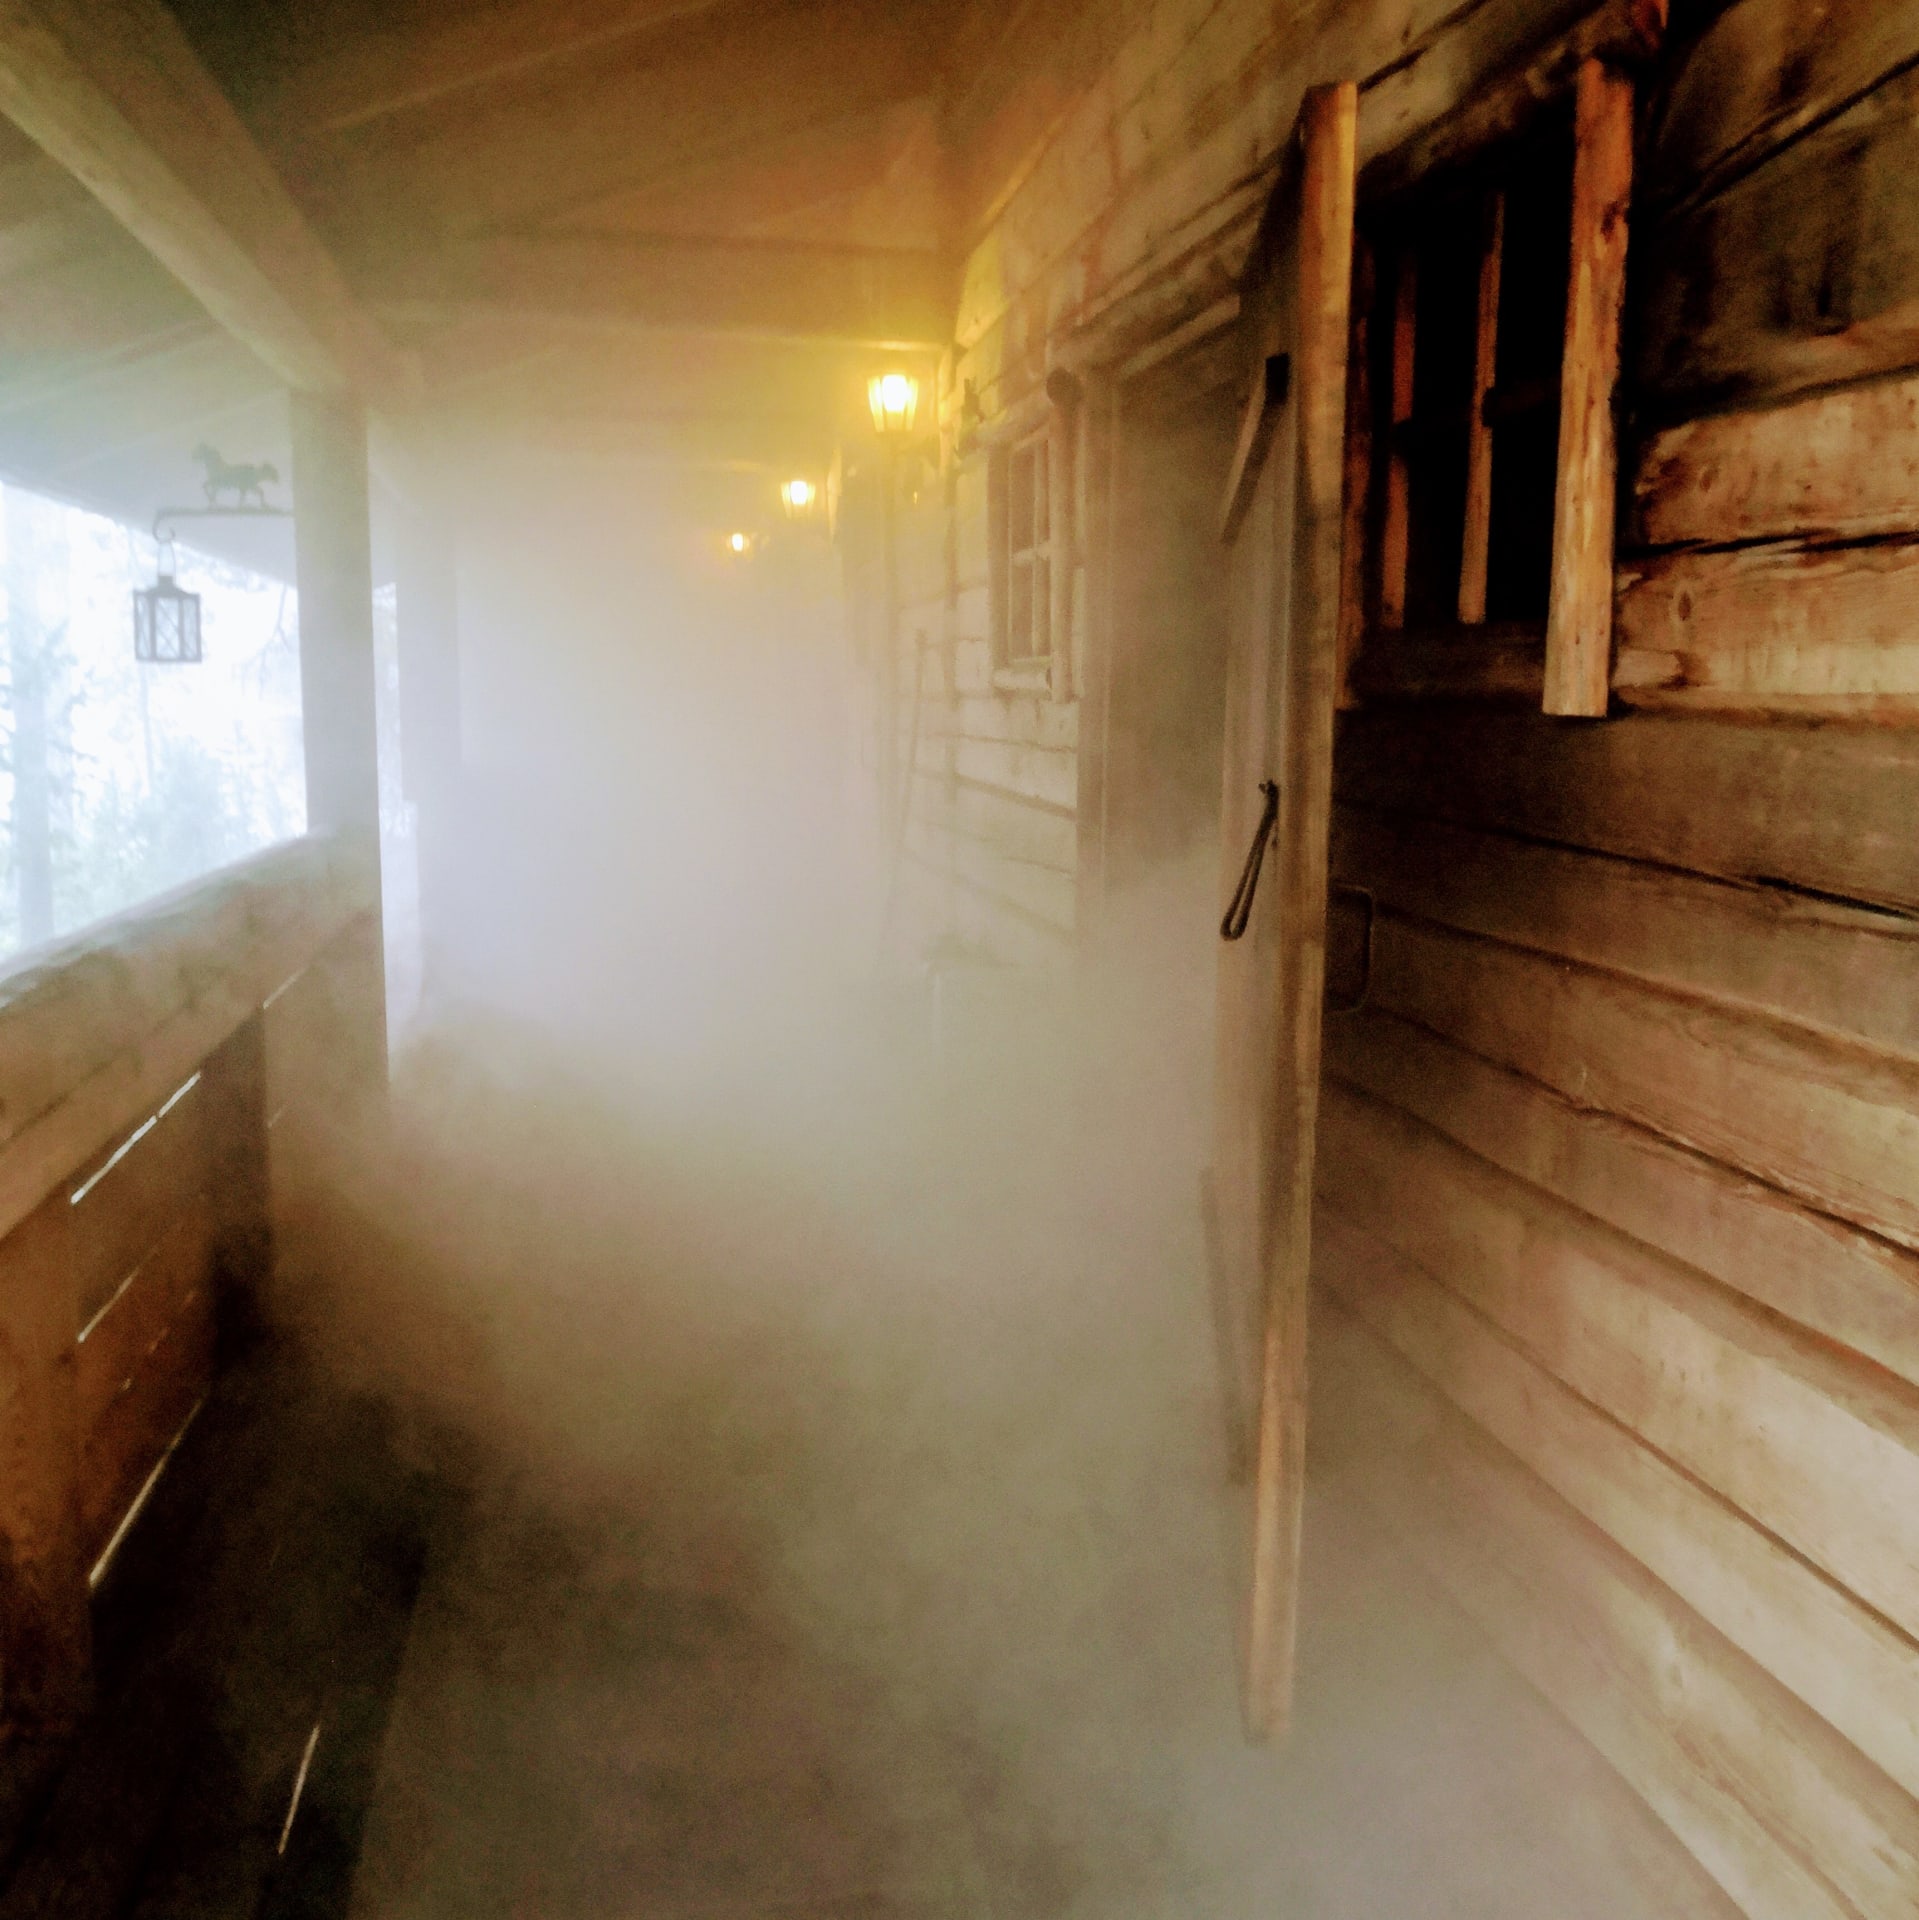 The heating of Smoke Sauna. When the smoke is gone the steam is soft as a feather.